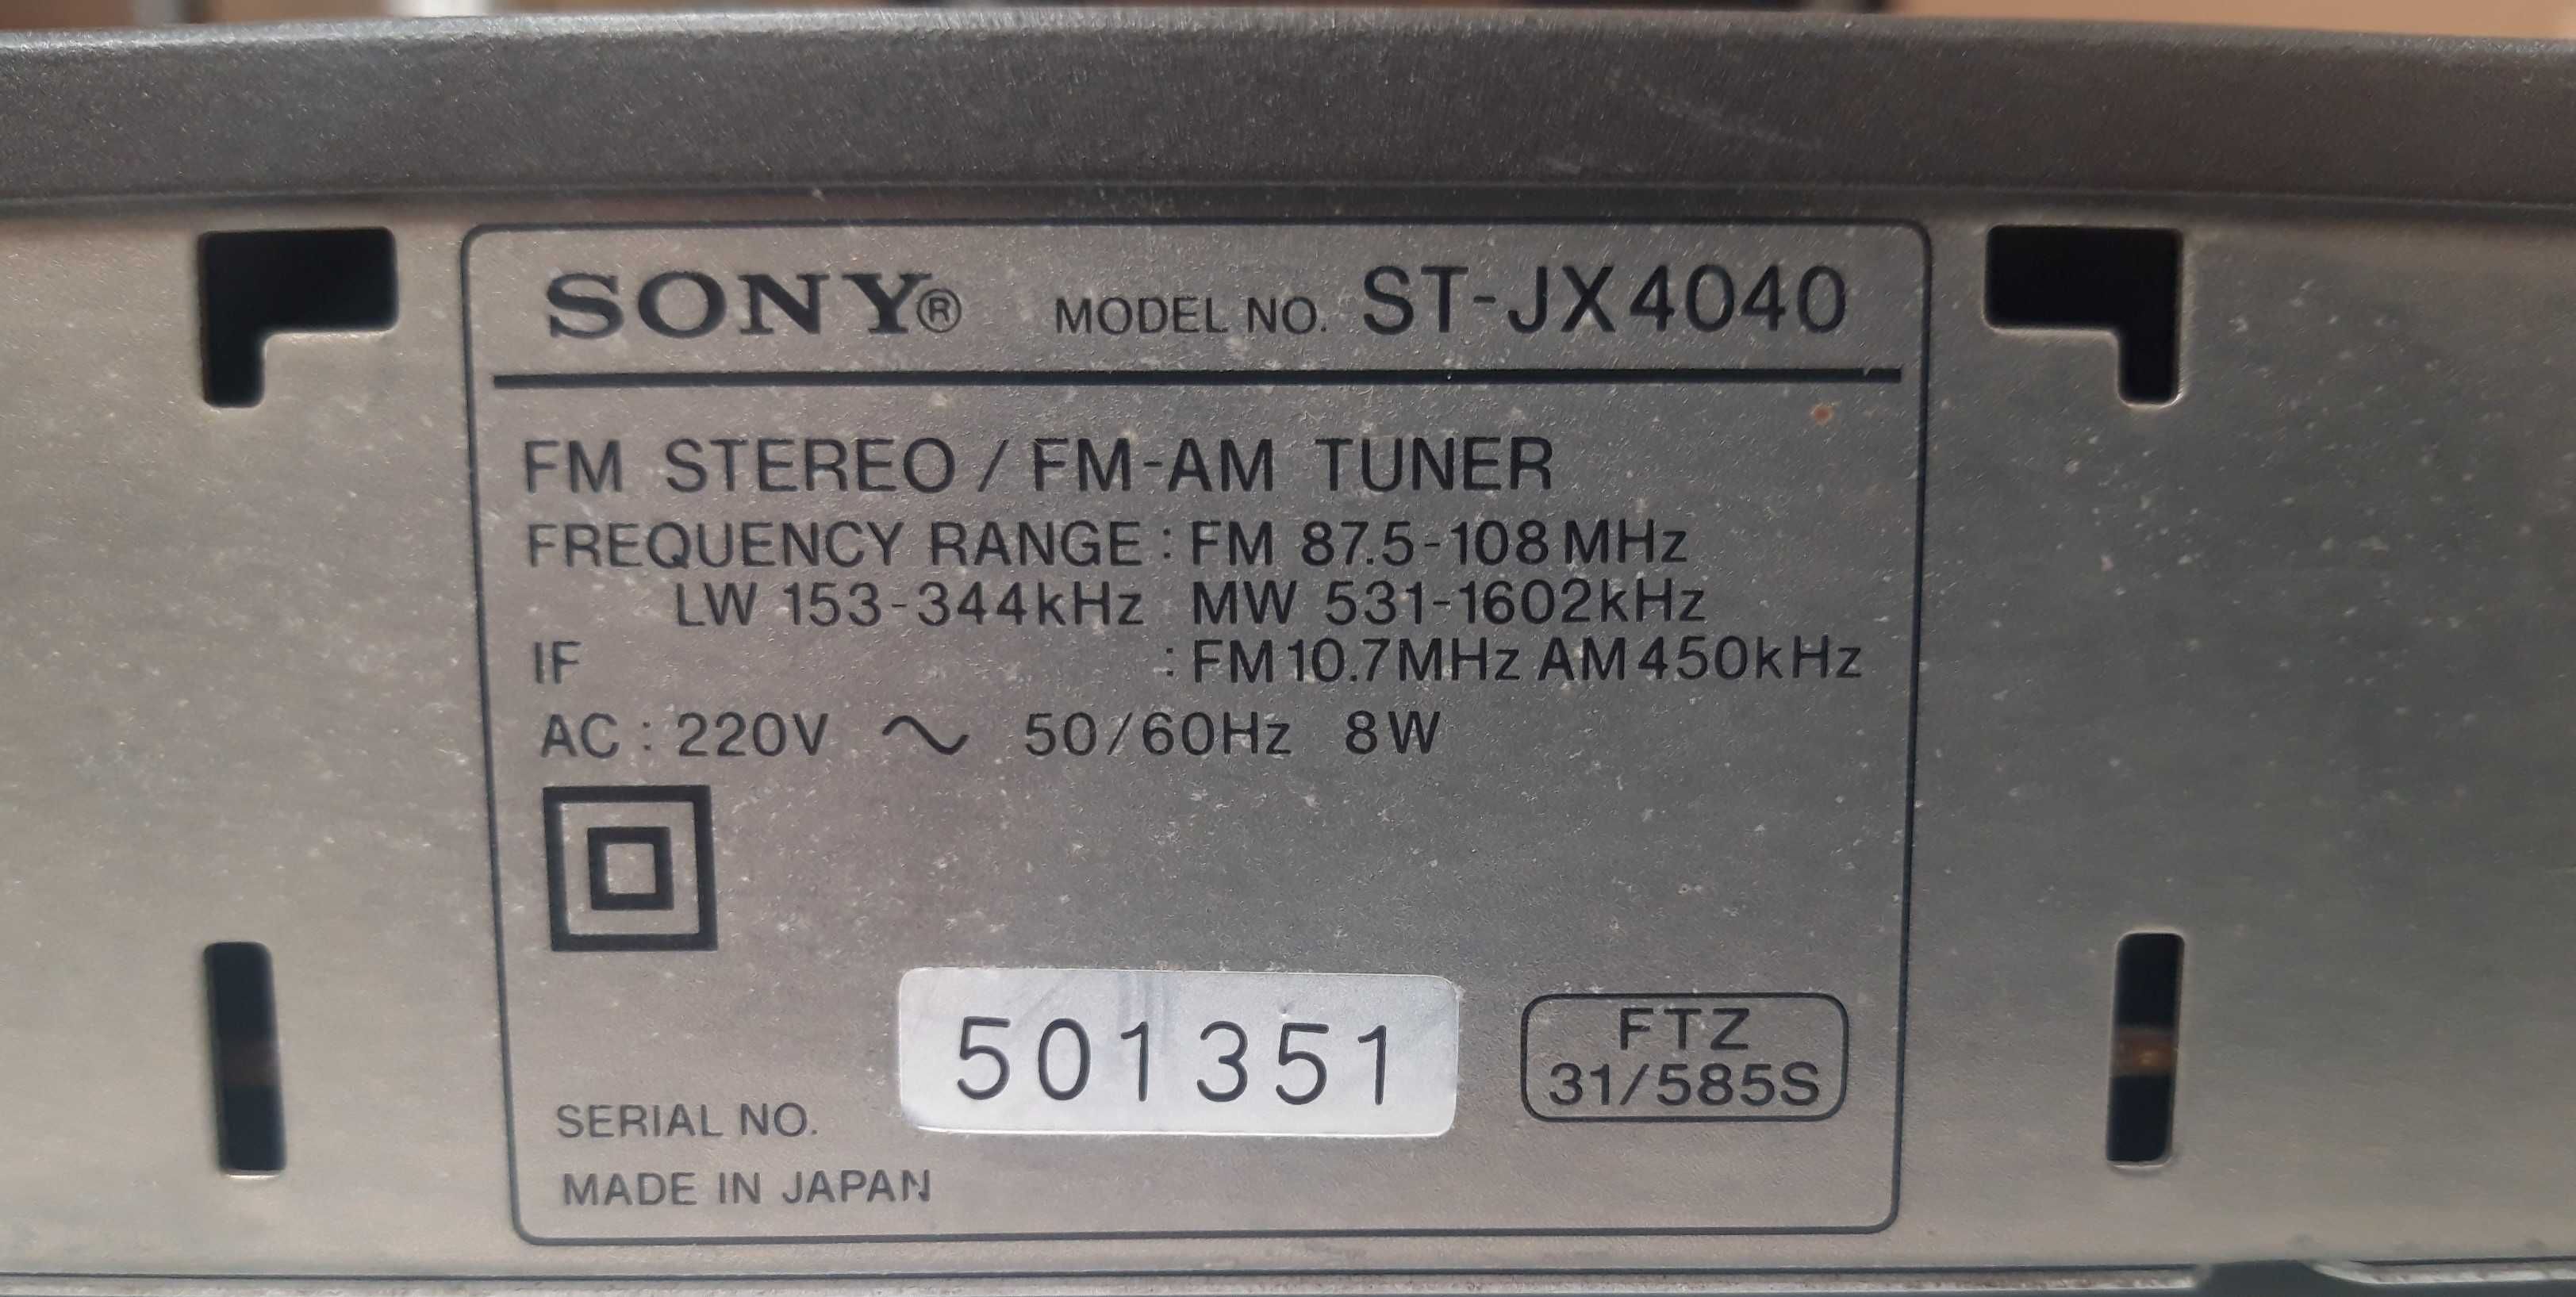 SONY ST-JX 4040 Made in Japan